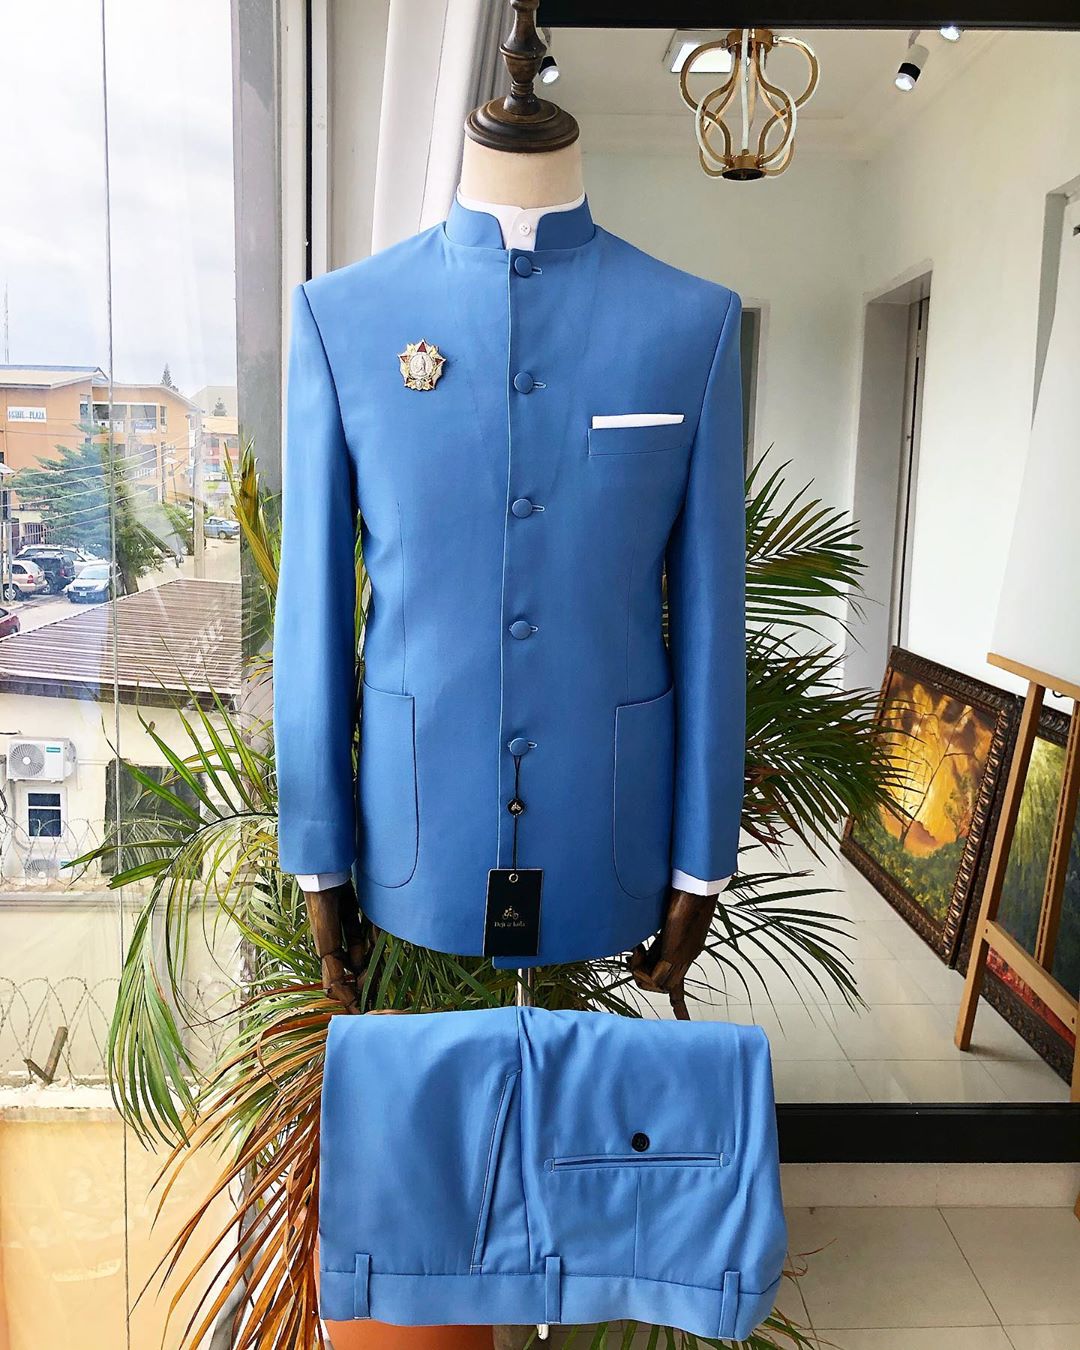 A Powdered Blue “clergyman” French safari Suit and pant trouser